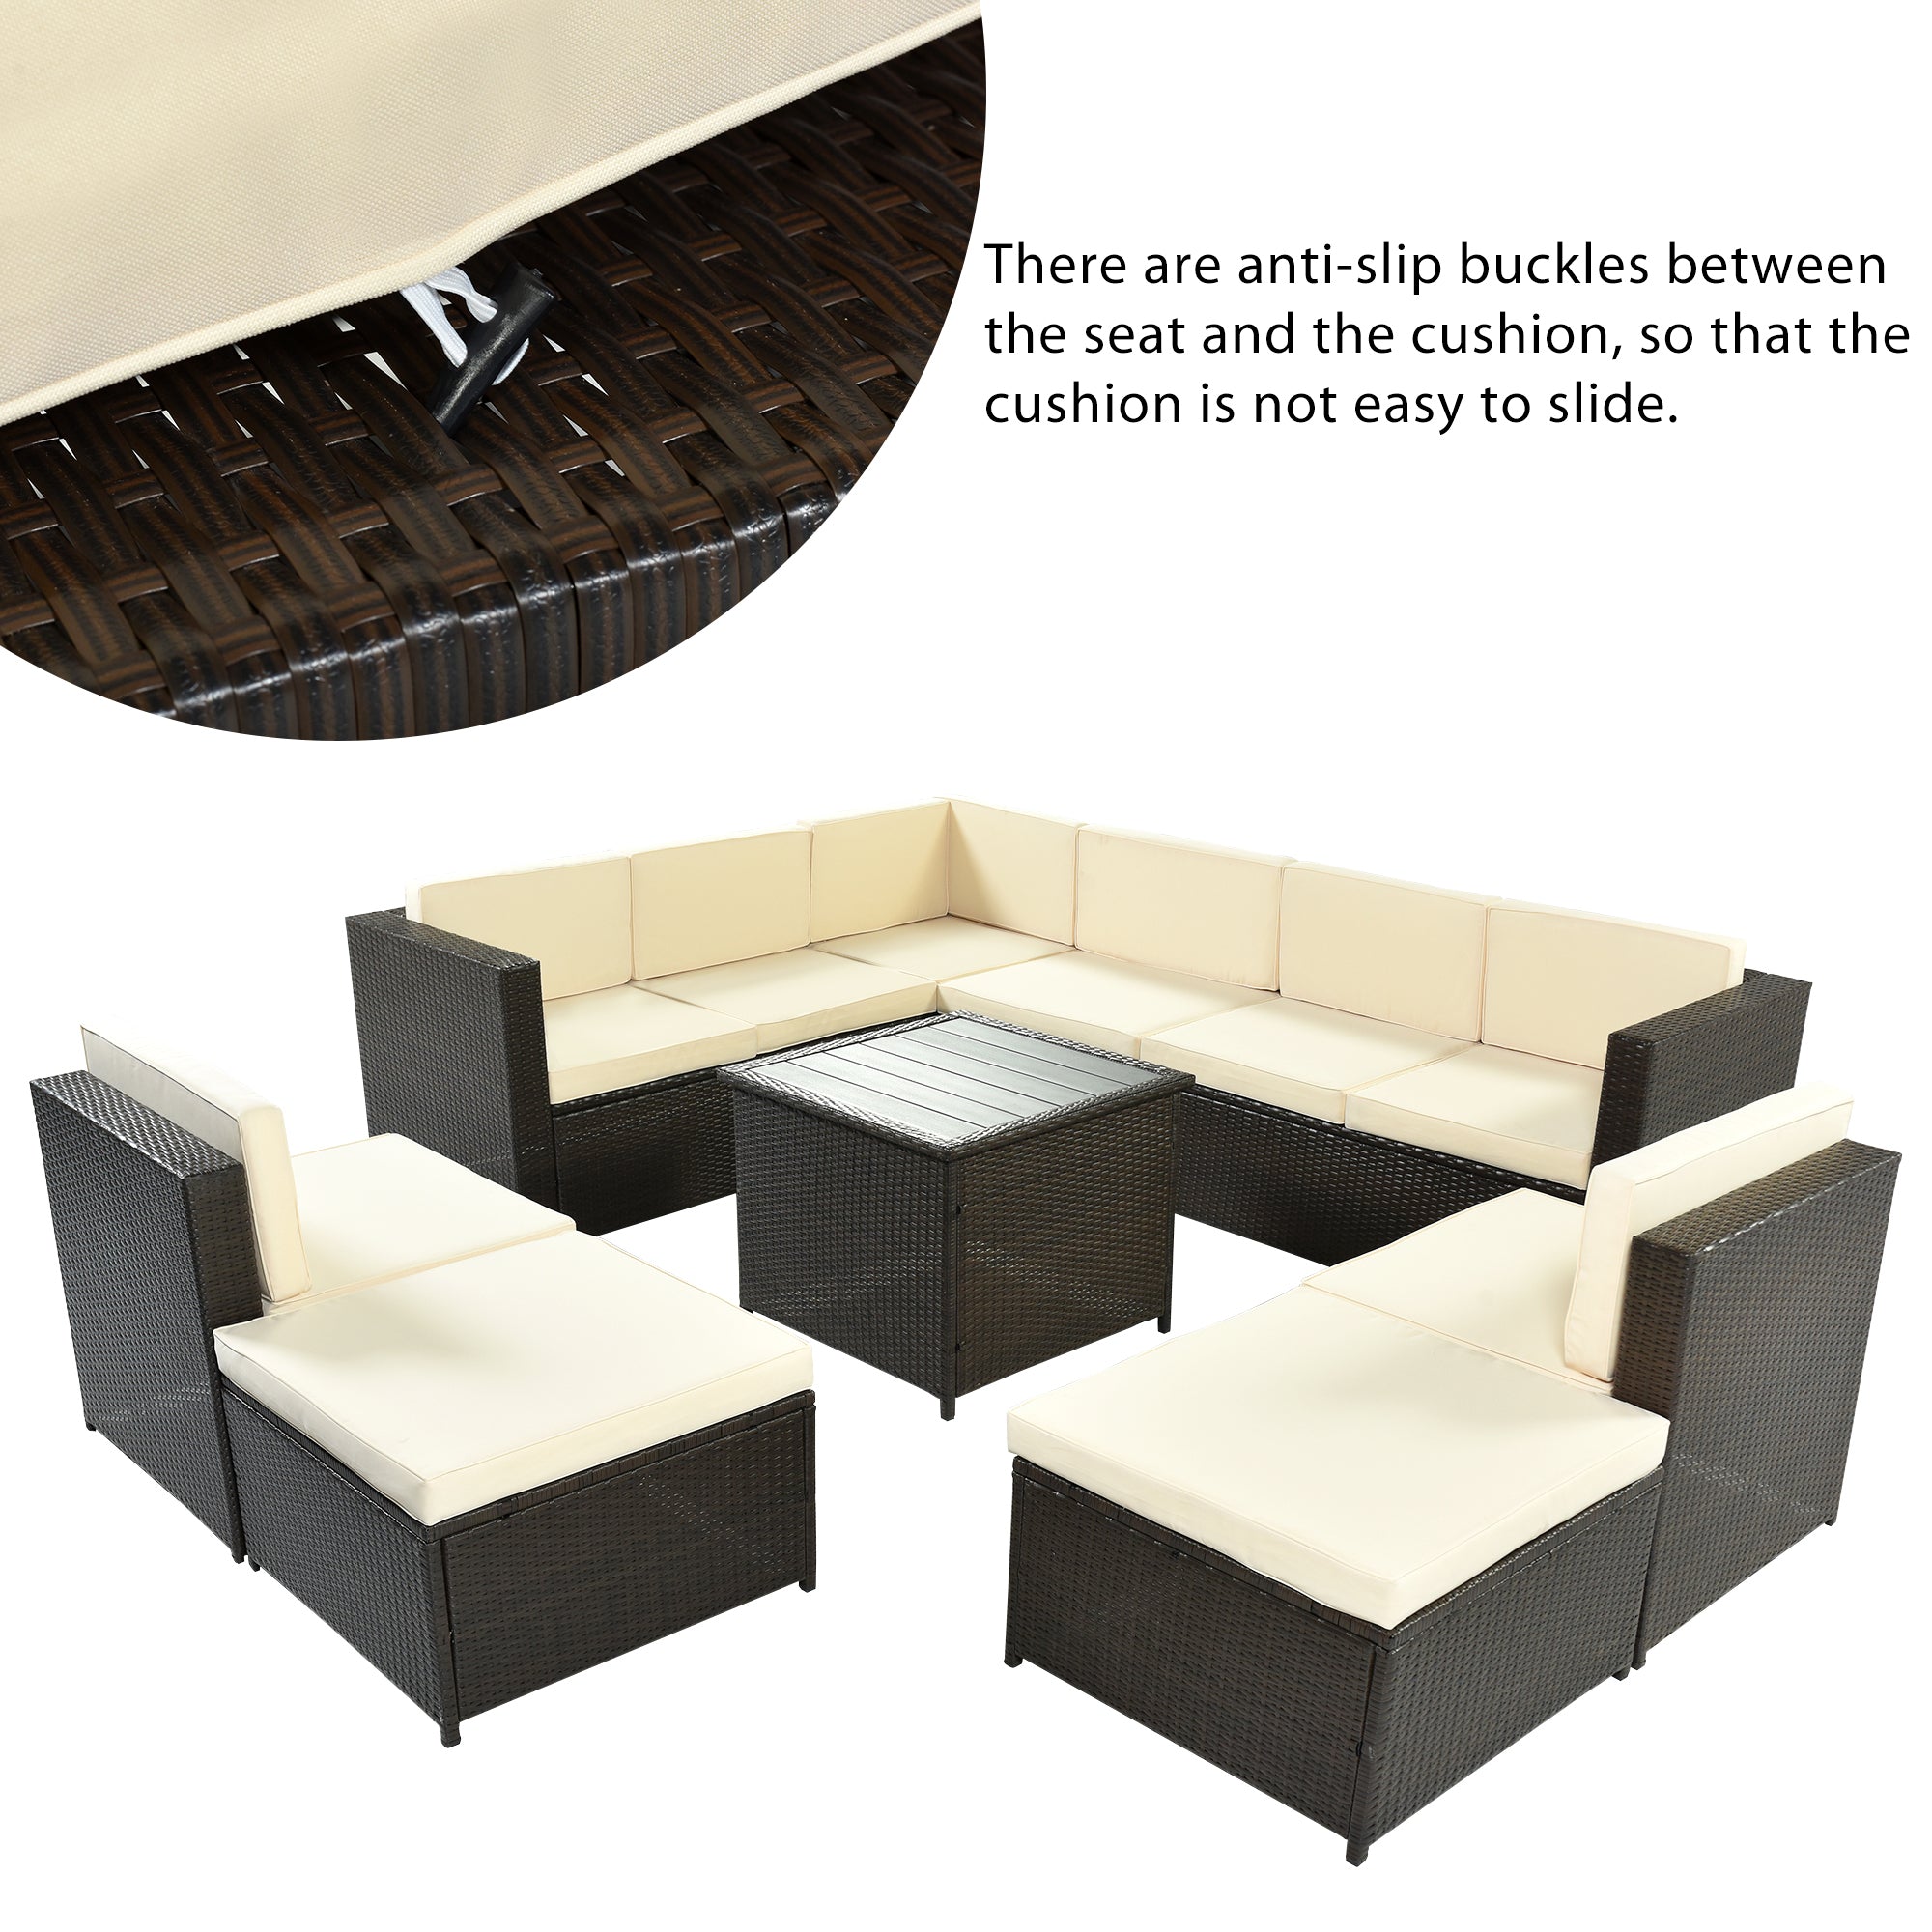 U Style 9 Piece Rattan Sectional Seating Group with beige-rattan